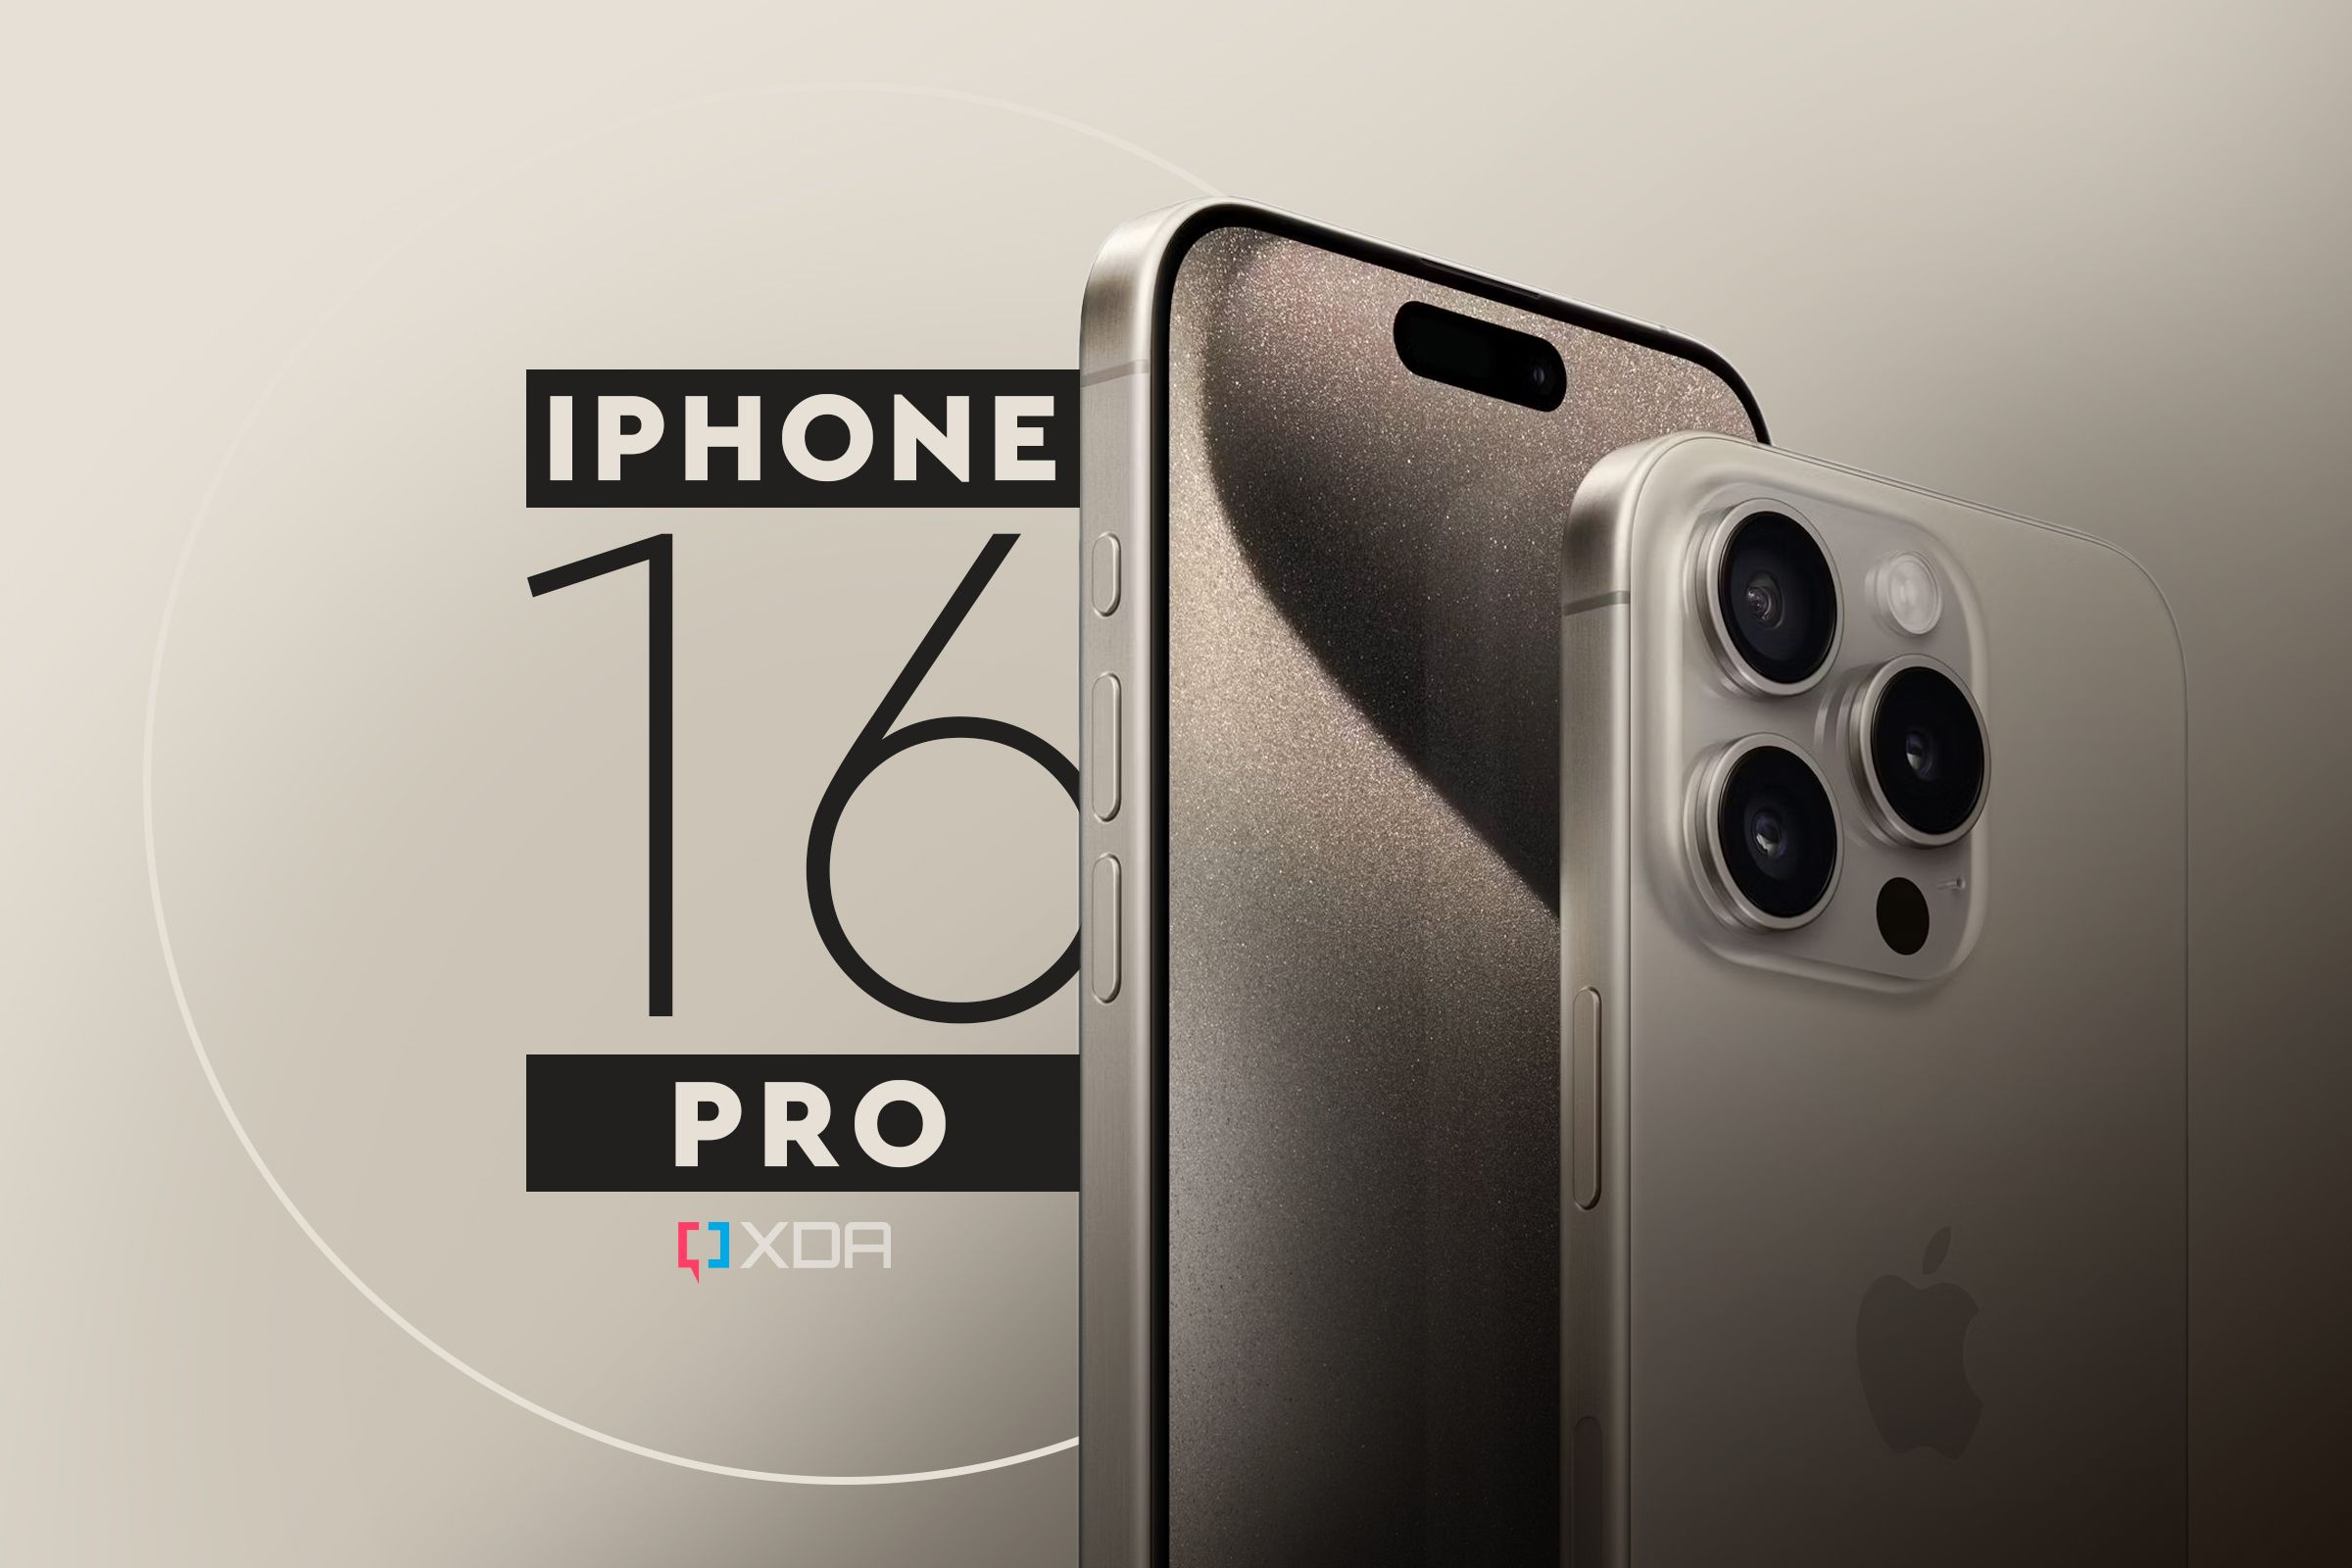 iPhone 16 Pro: Leaks, rumors, and what we would like to see